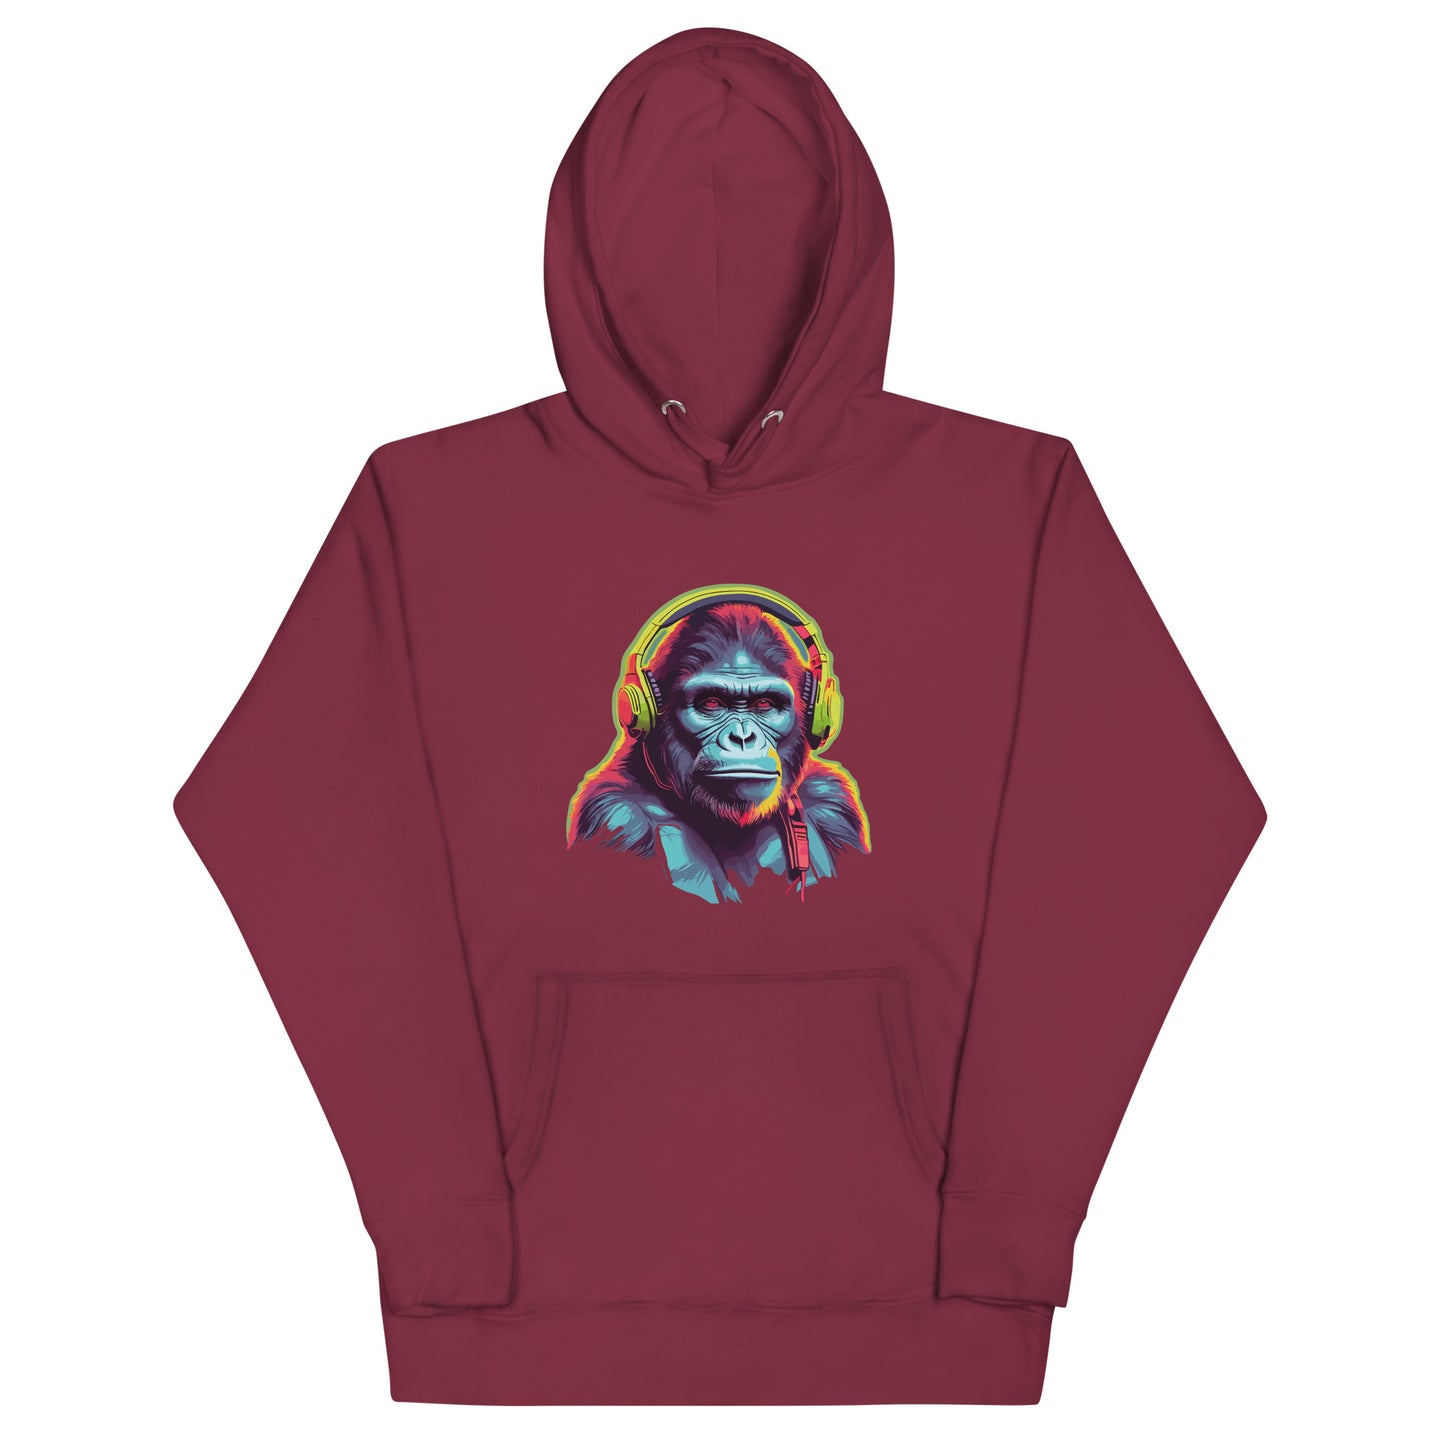 Maroon Hoodie featuring a fun ape with headphones design. Taken from the TEQNEON MUSIC BOX, NEOLIFIC & HA HA LAND collections